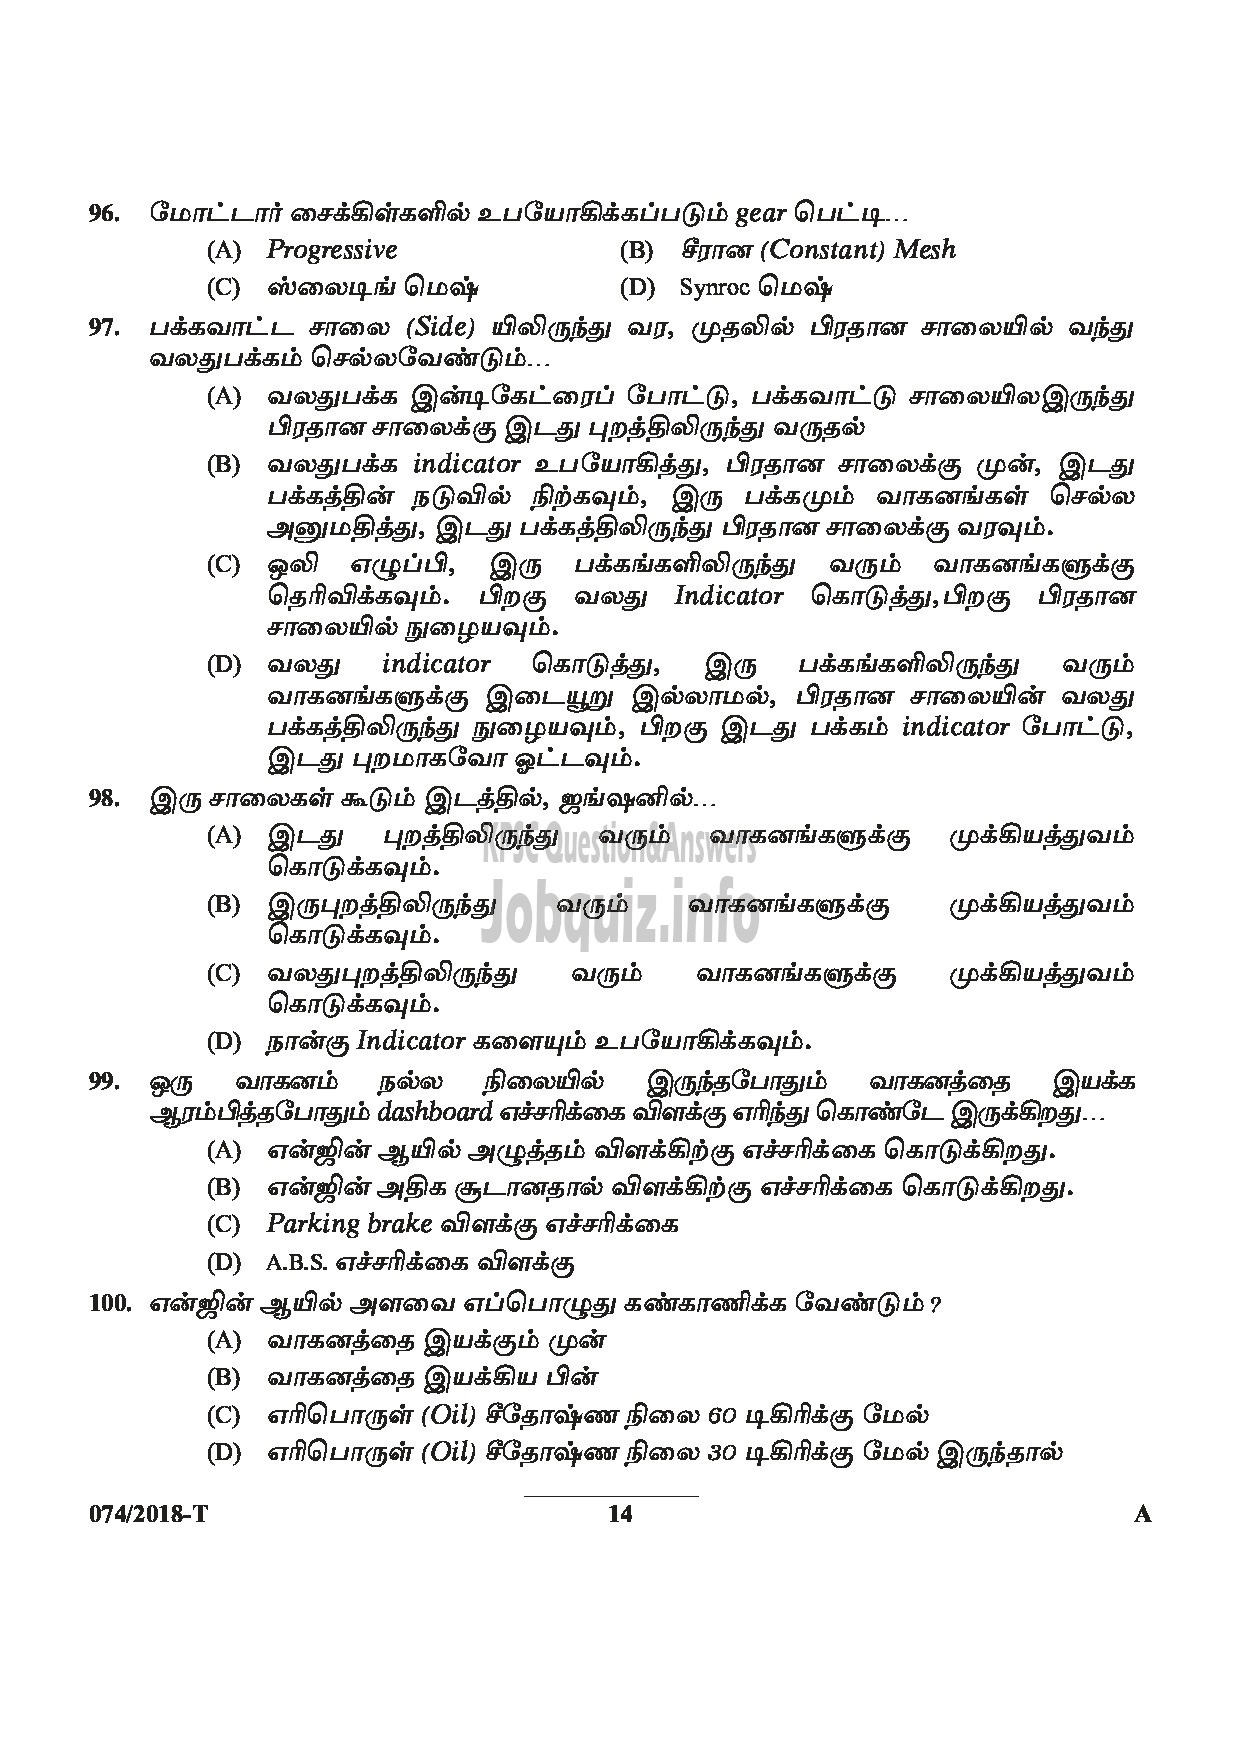 Kerala PSC Question Paper - Police Constable Driver (Armed Police Battalion) Department : Police Medium of Question : Tamil-14